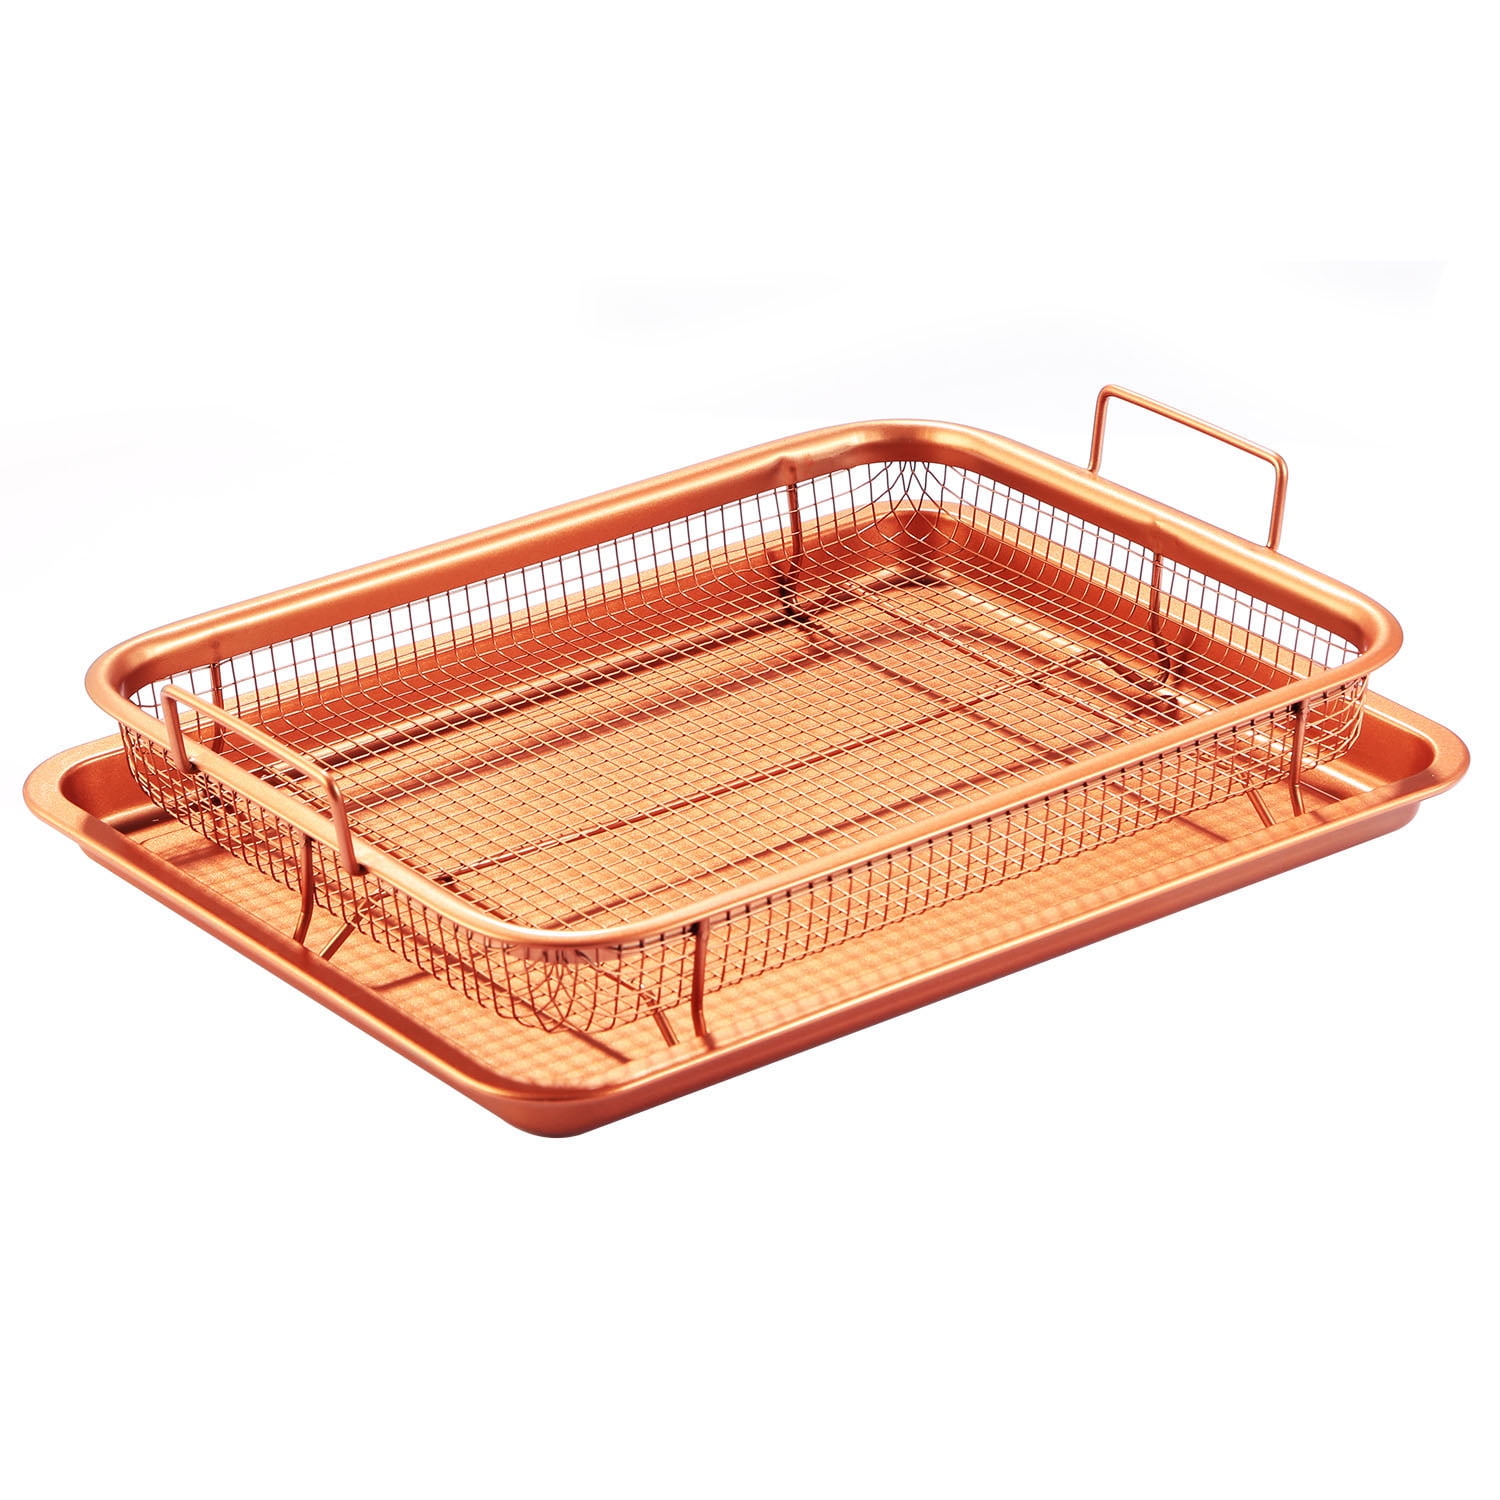 Crisper Basket Recipe Cookbook: Nonstick Copper Tray Works As an Air Fryer. Multi-Purpose Cooking for Oven, Stovetop Or Grill [Book]